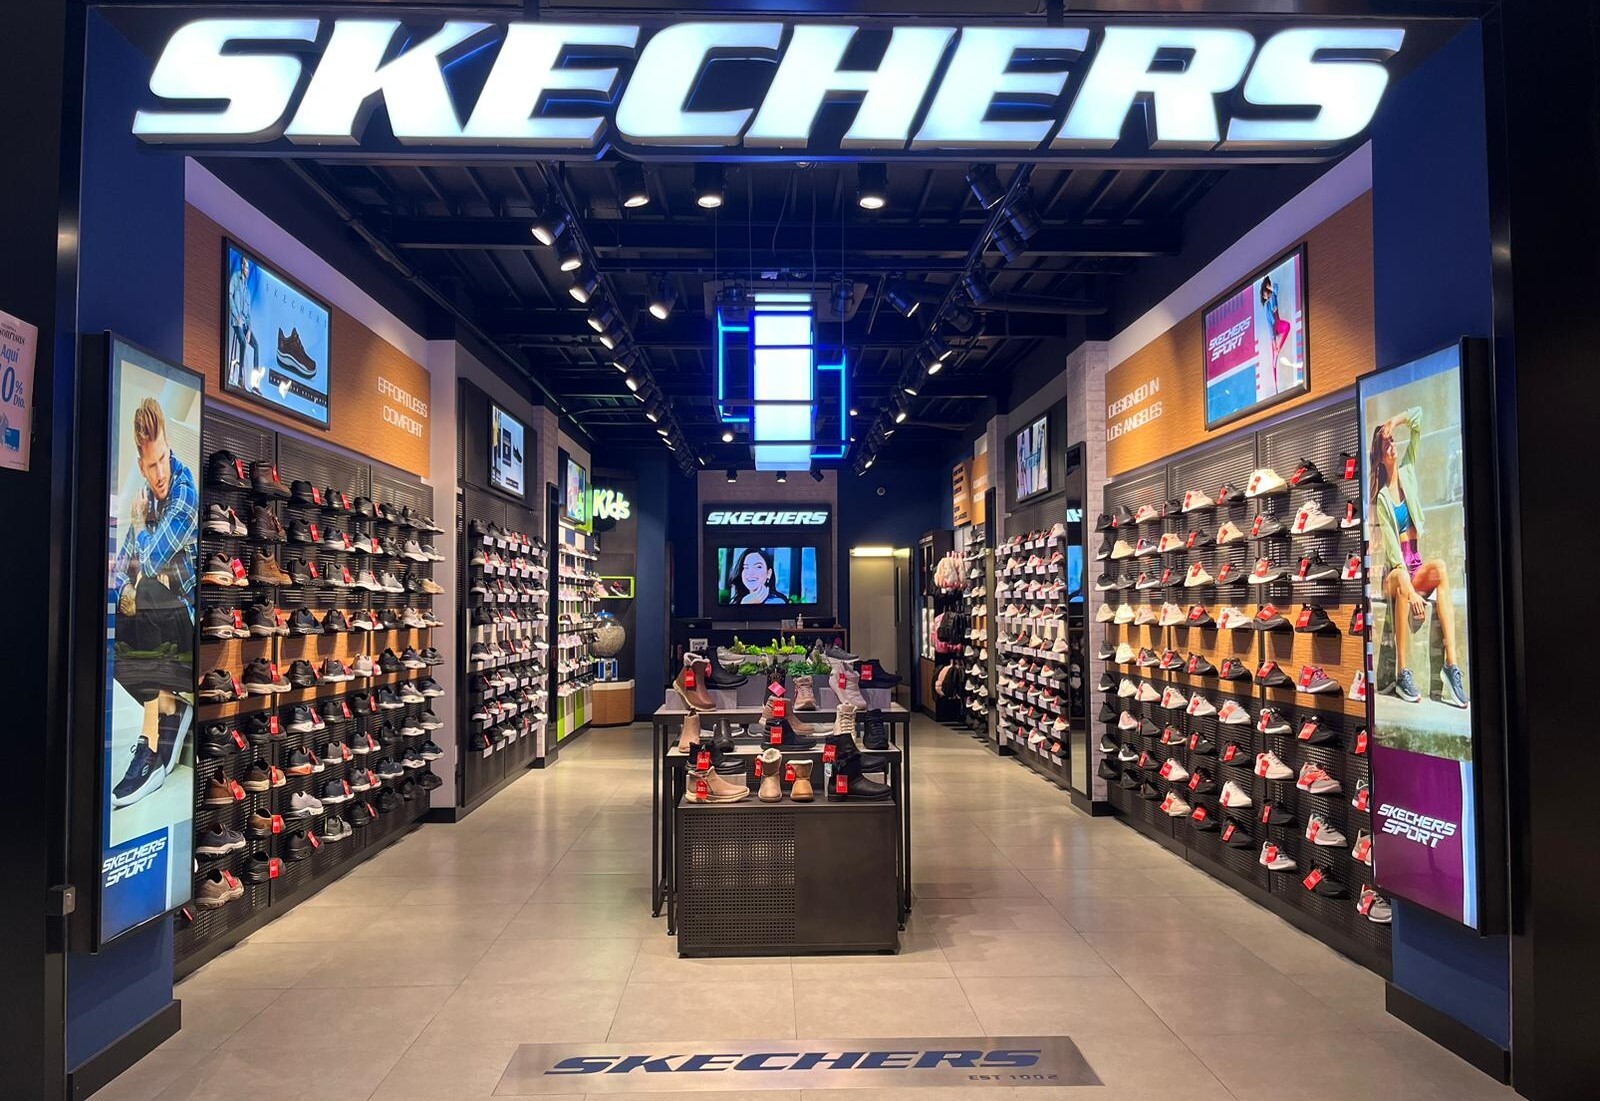 Skechers Tres Cruces